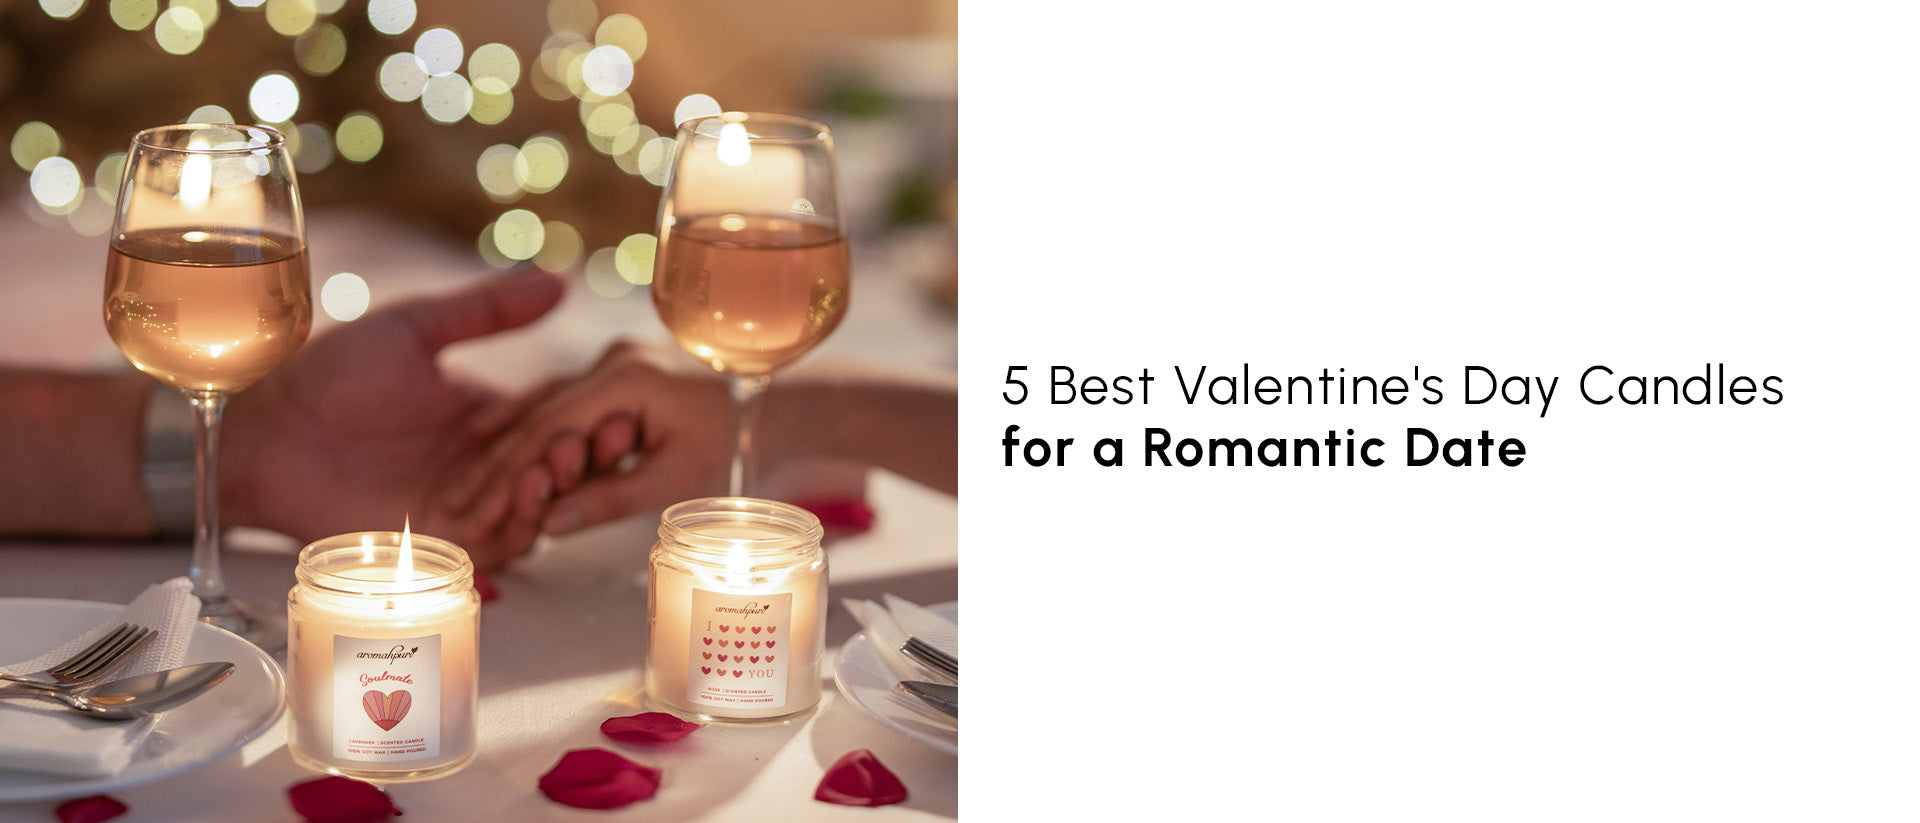 5 Best Valentine's Day Candles for a Romantic Date